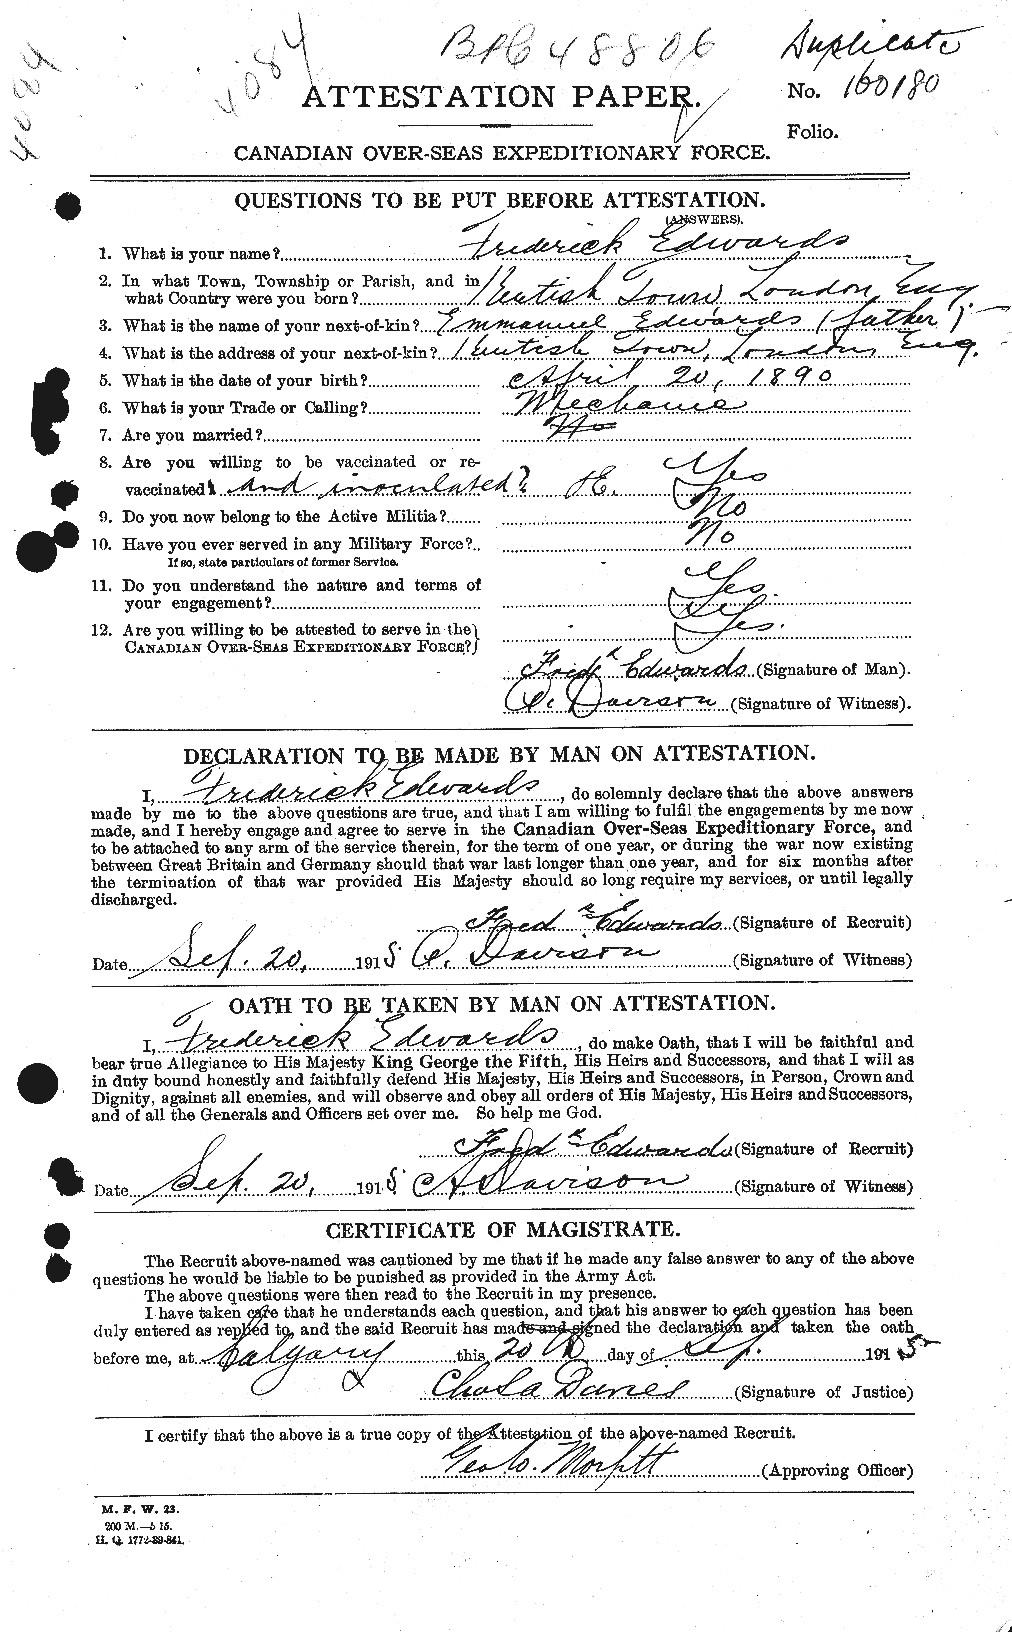 Personnel Records of the First World War - CEF 309067a